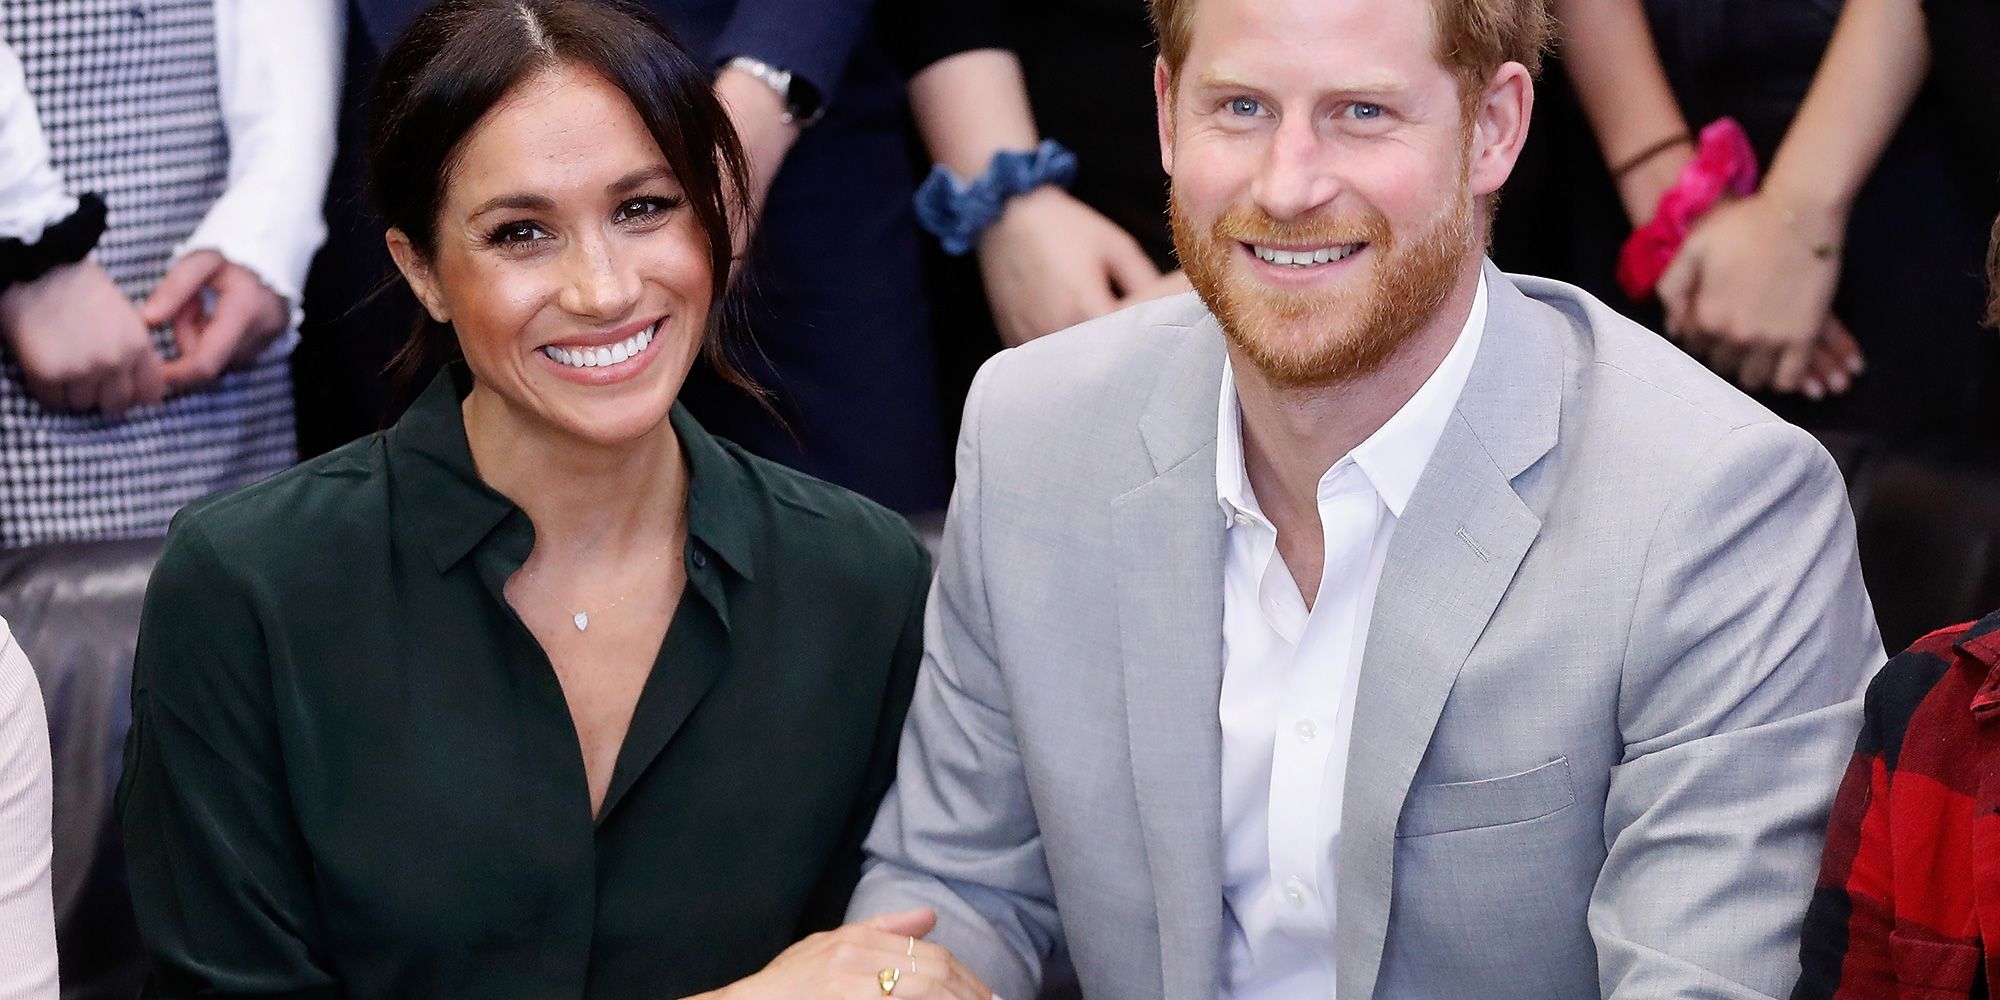 Why Meghan and Harry will briefly split up during their royal tour to Australia